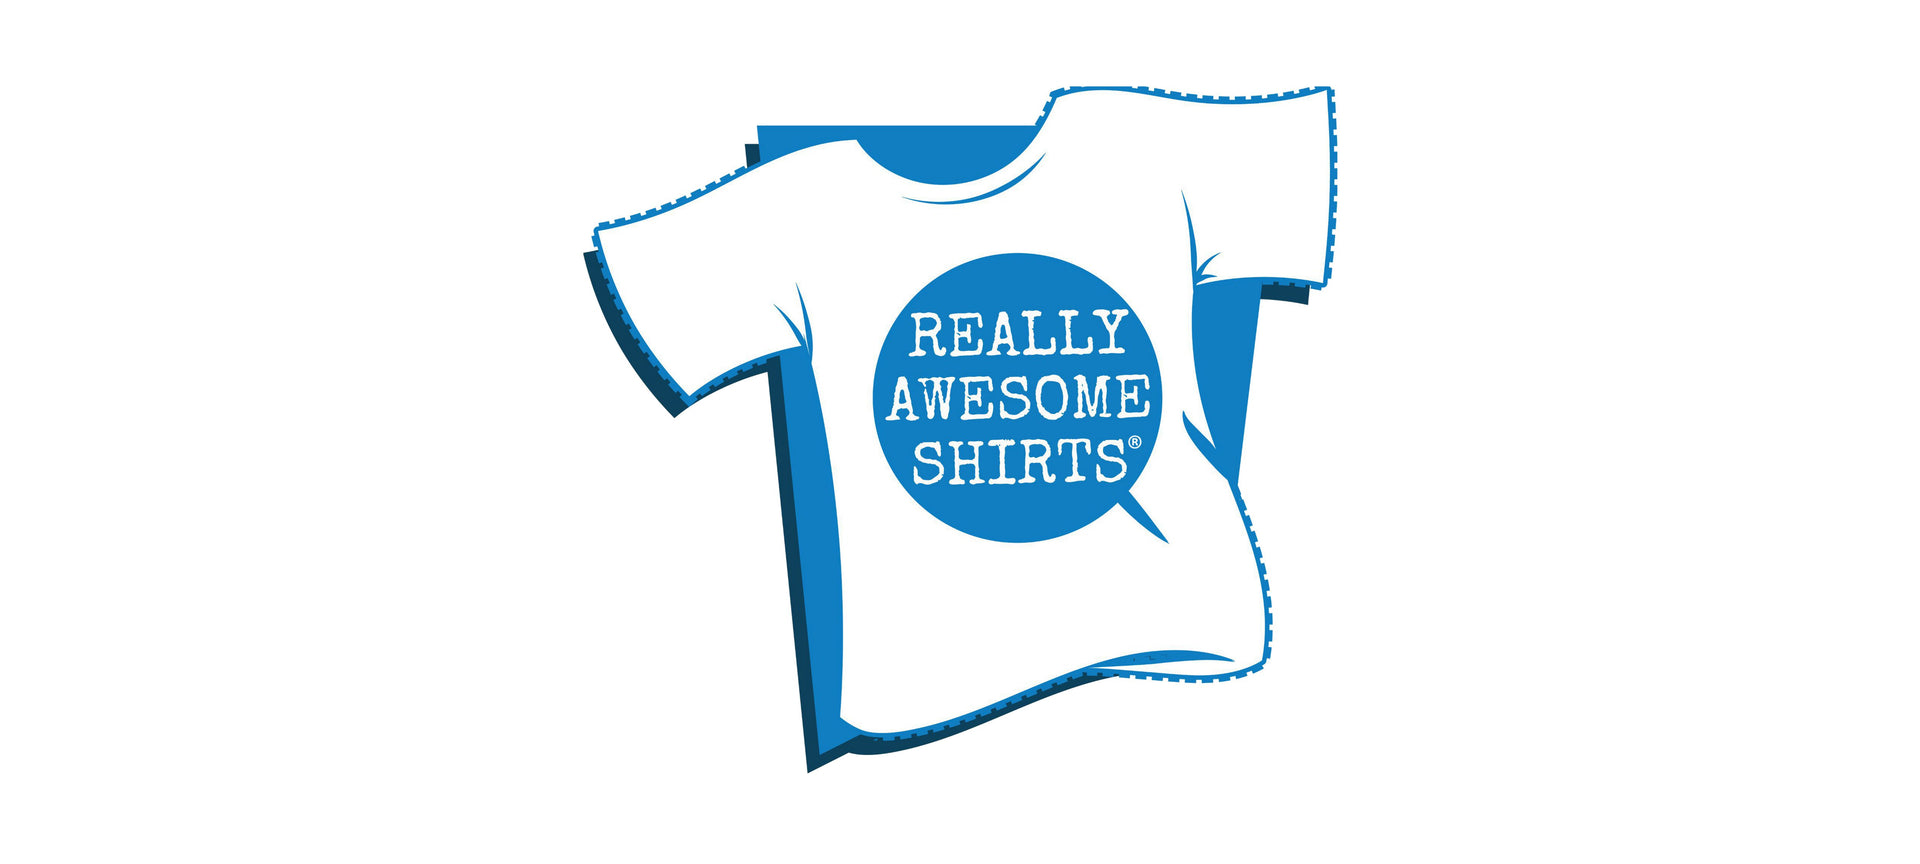 Load video: Really Awesome Shirts